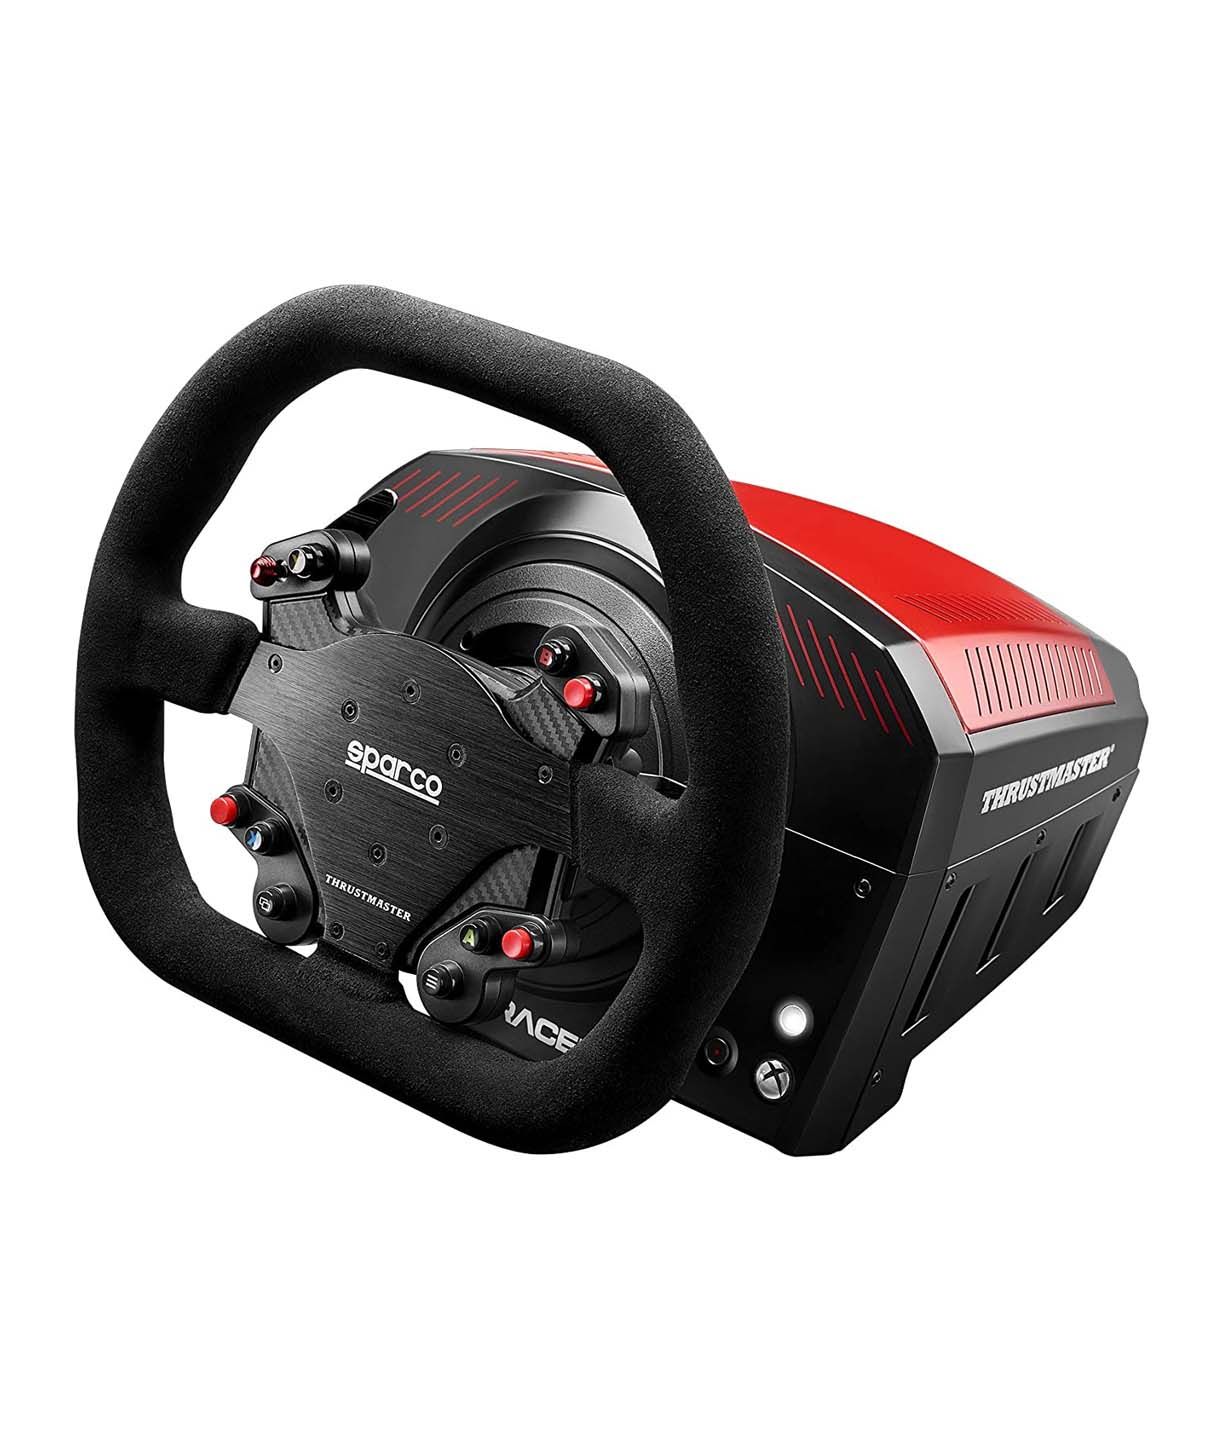 Vô Lăng Thrustmaster Ts Xw Racer Sparco P310 Competition Mod 2